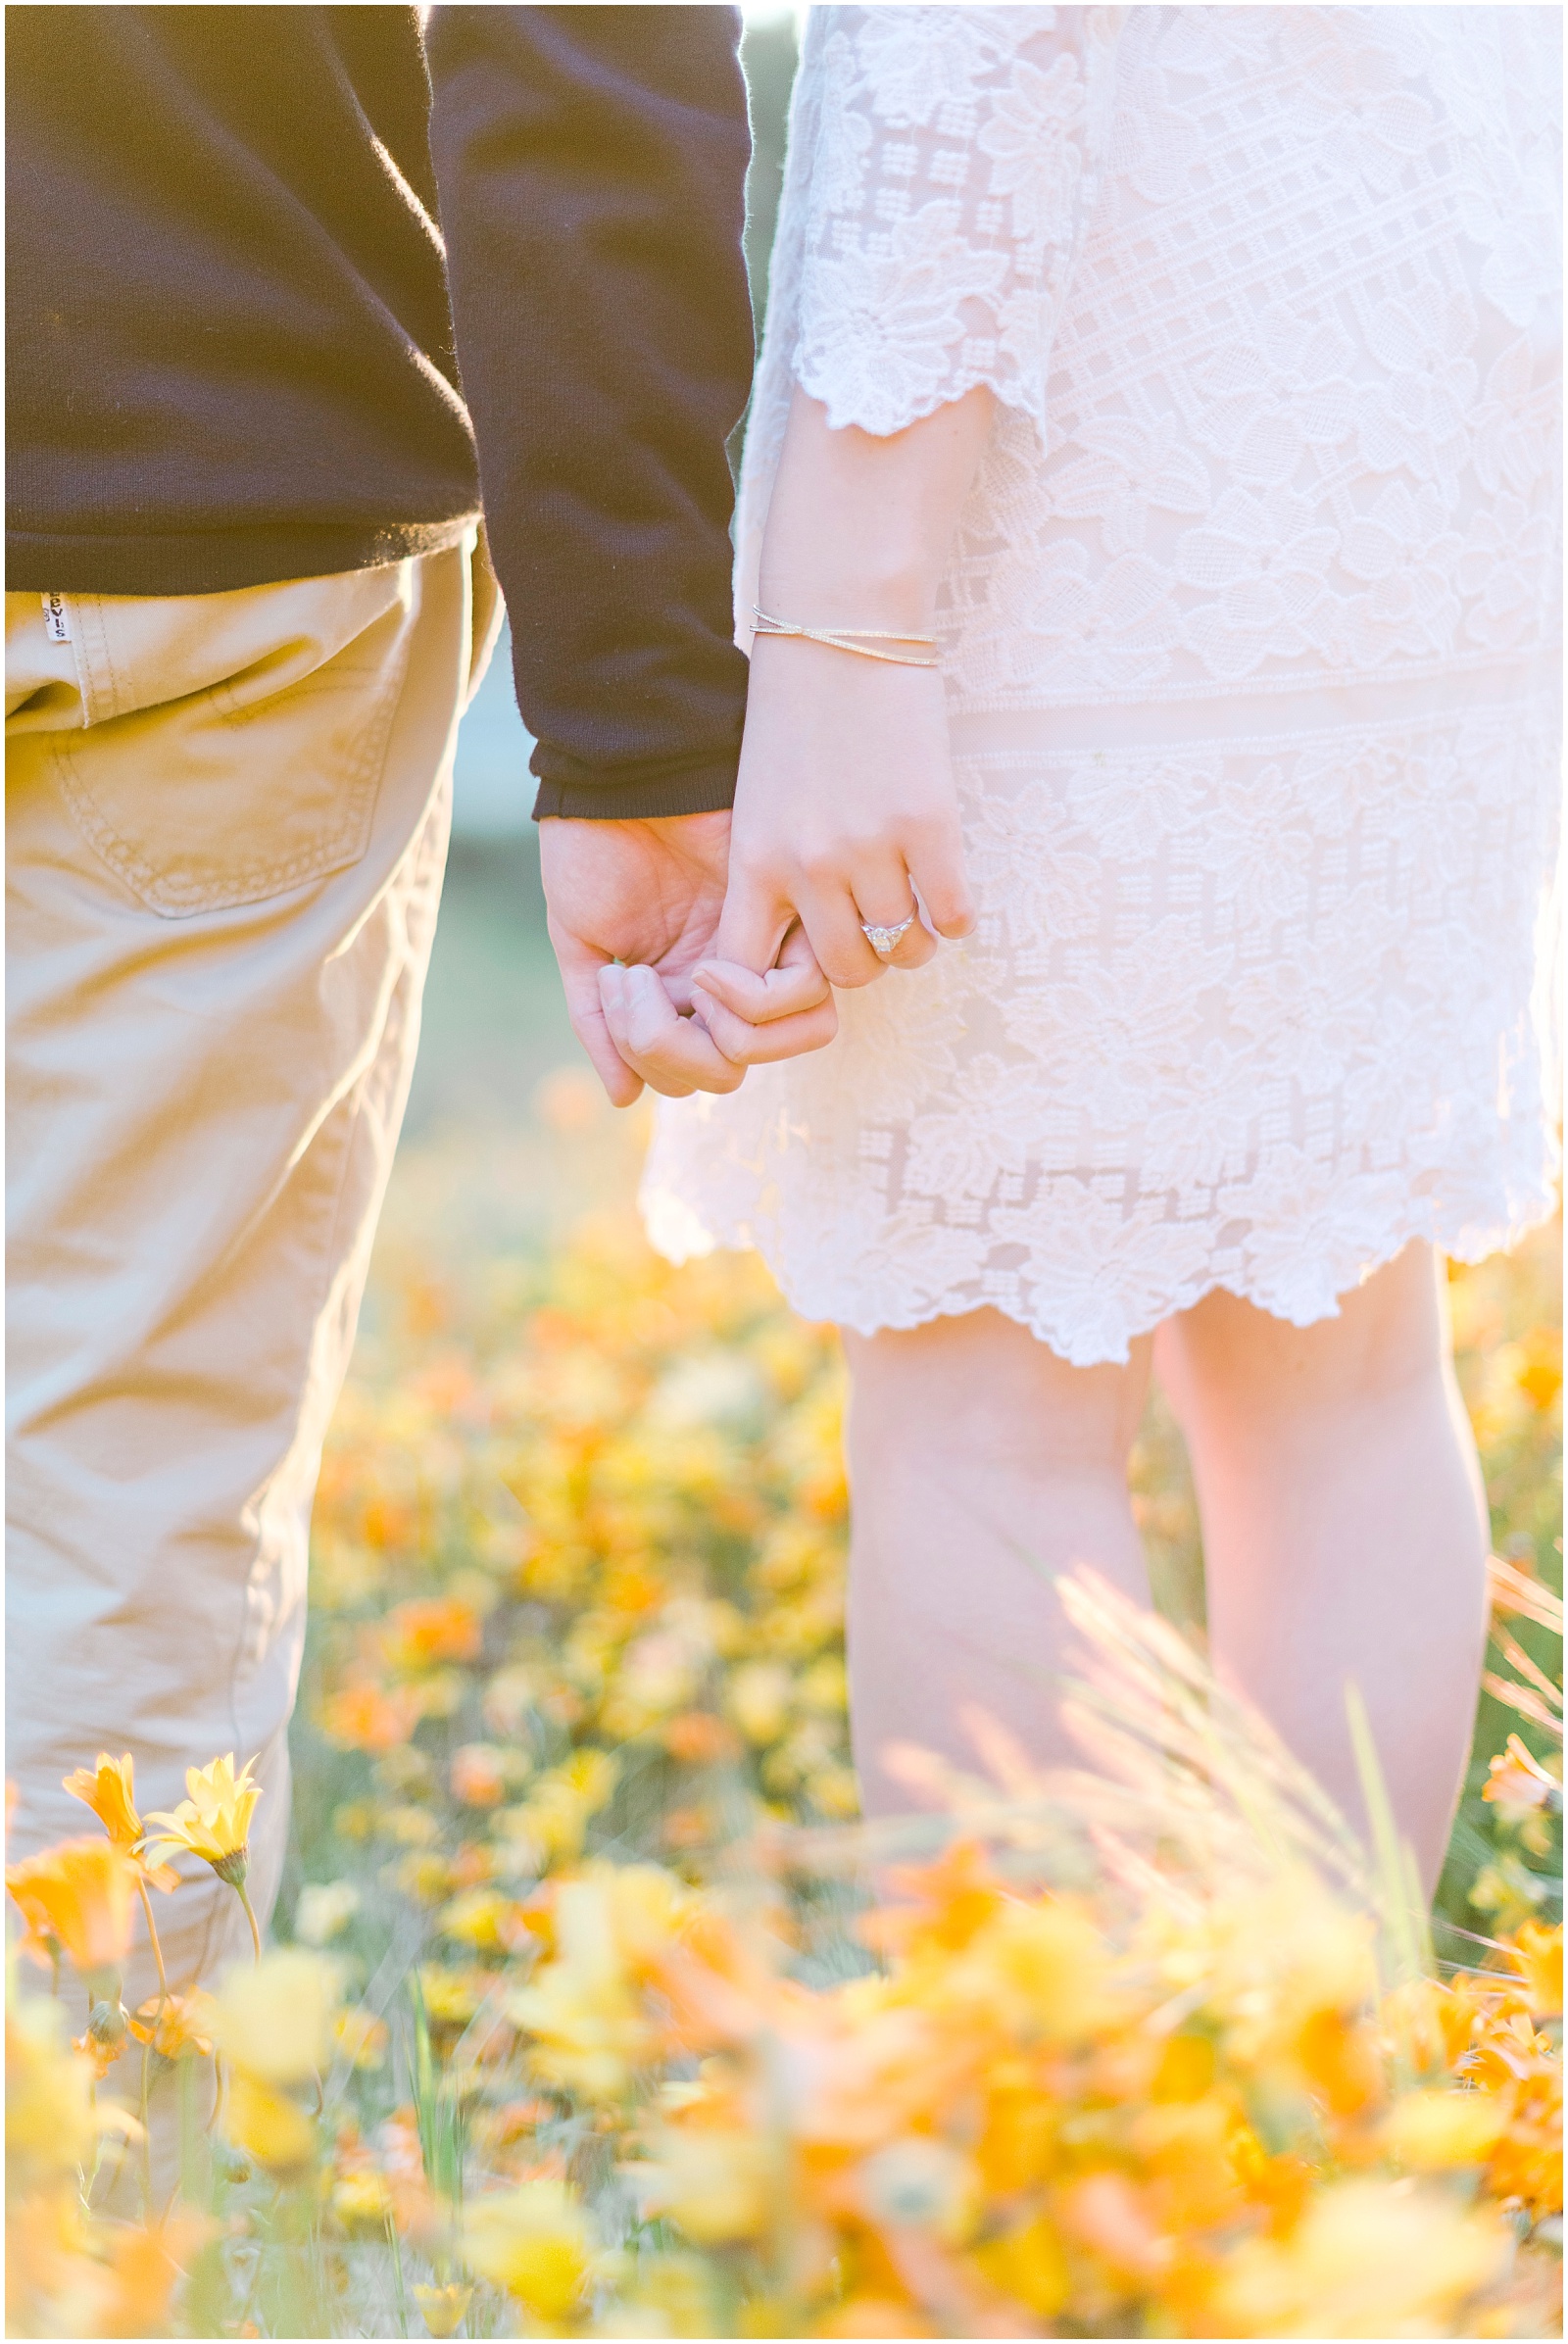 Yucaipa Superbloom Engagement Session by Mollie Jane Photography.  To see more go to www.molliejanephotography.com